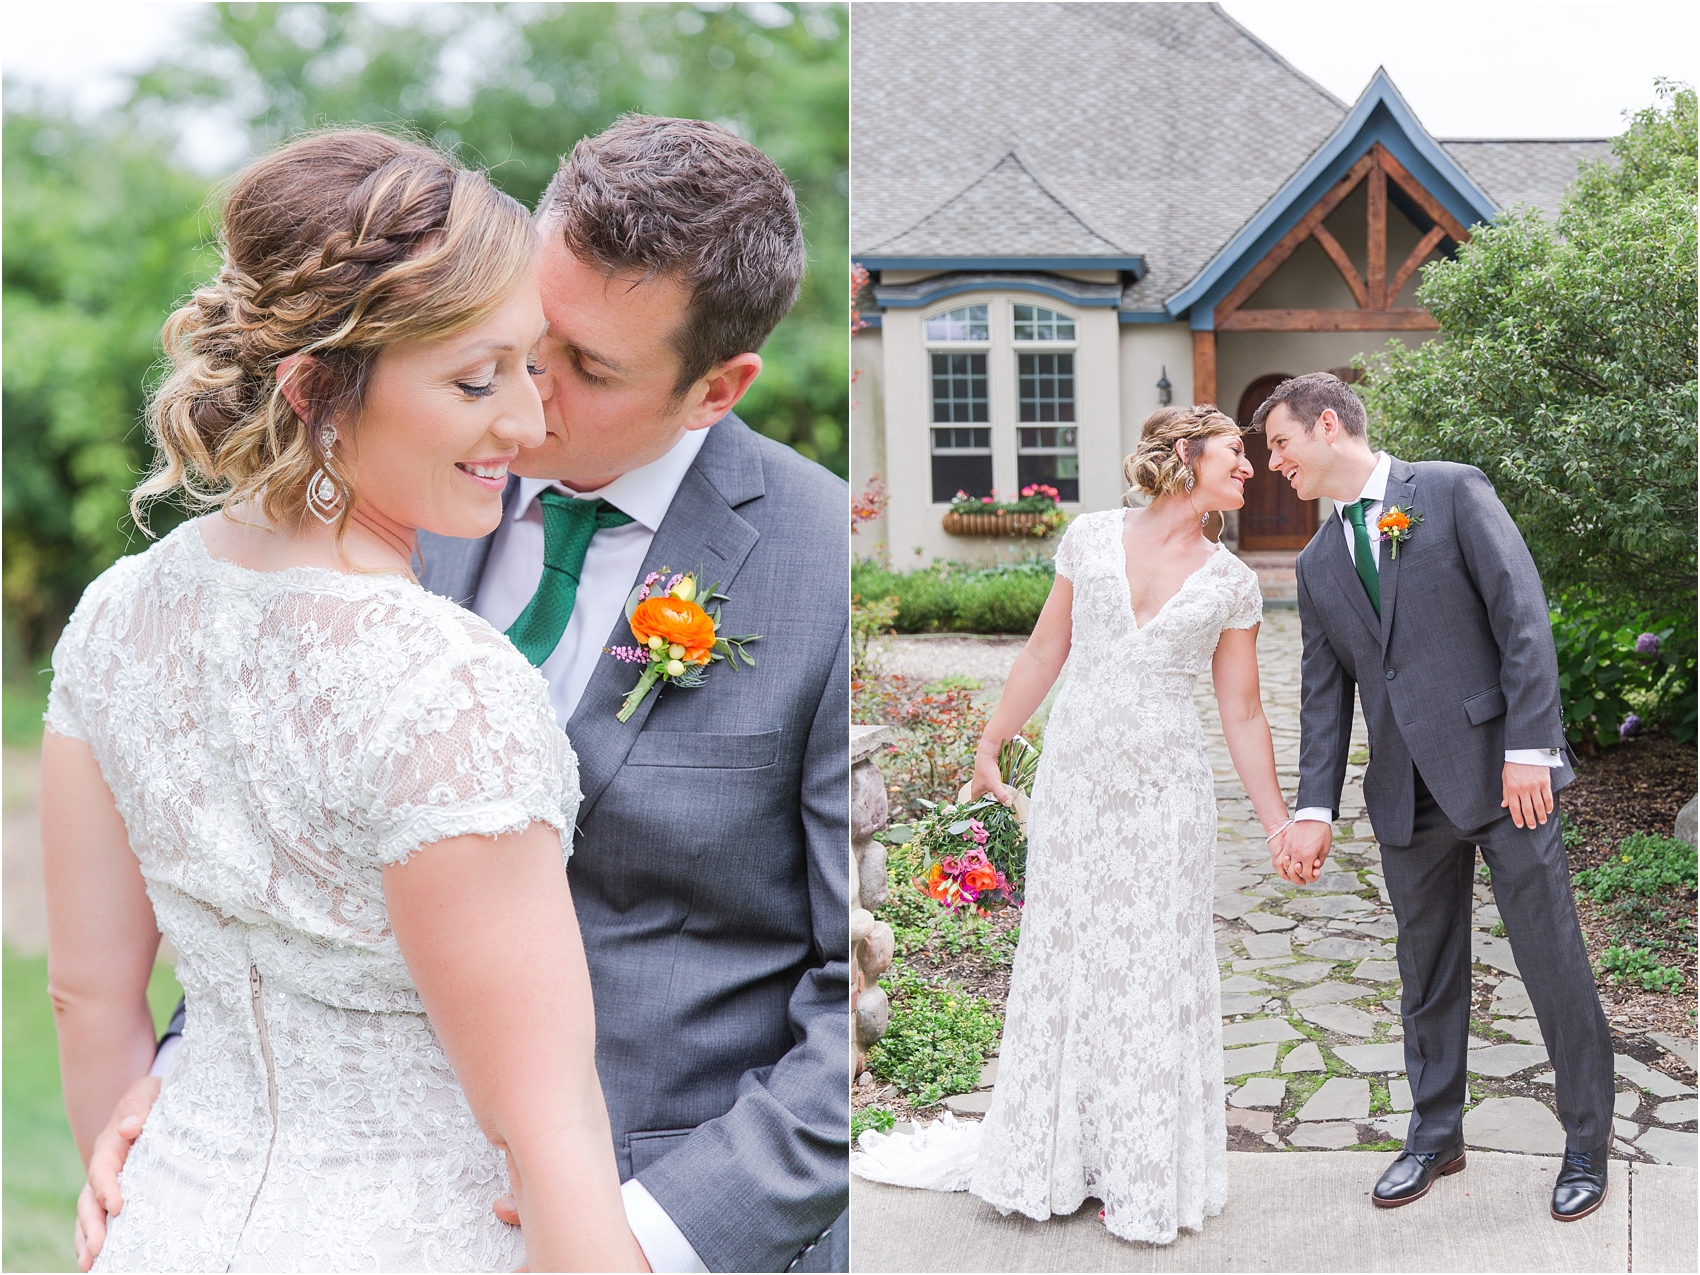 romantic-intimate-backyard-wedding-photos-at-private-estate-in-ann-arbor-mi-by-courtney-carolyn-photography_0055.jpg